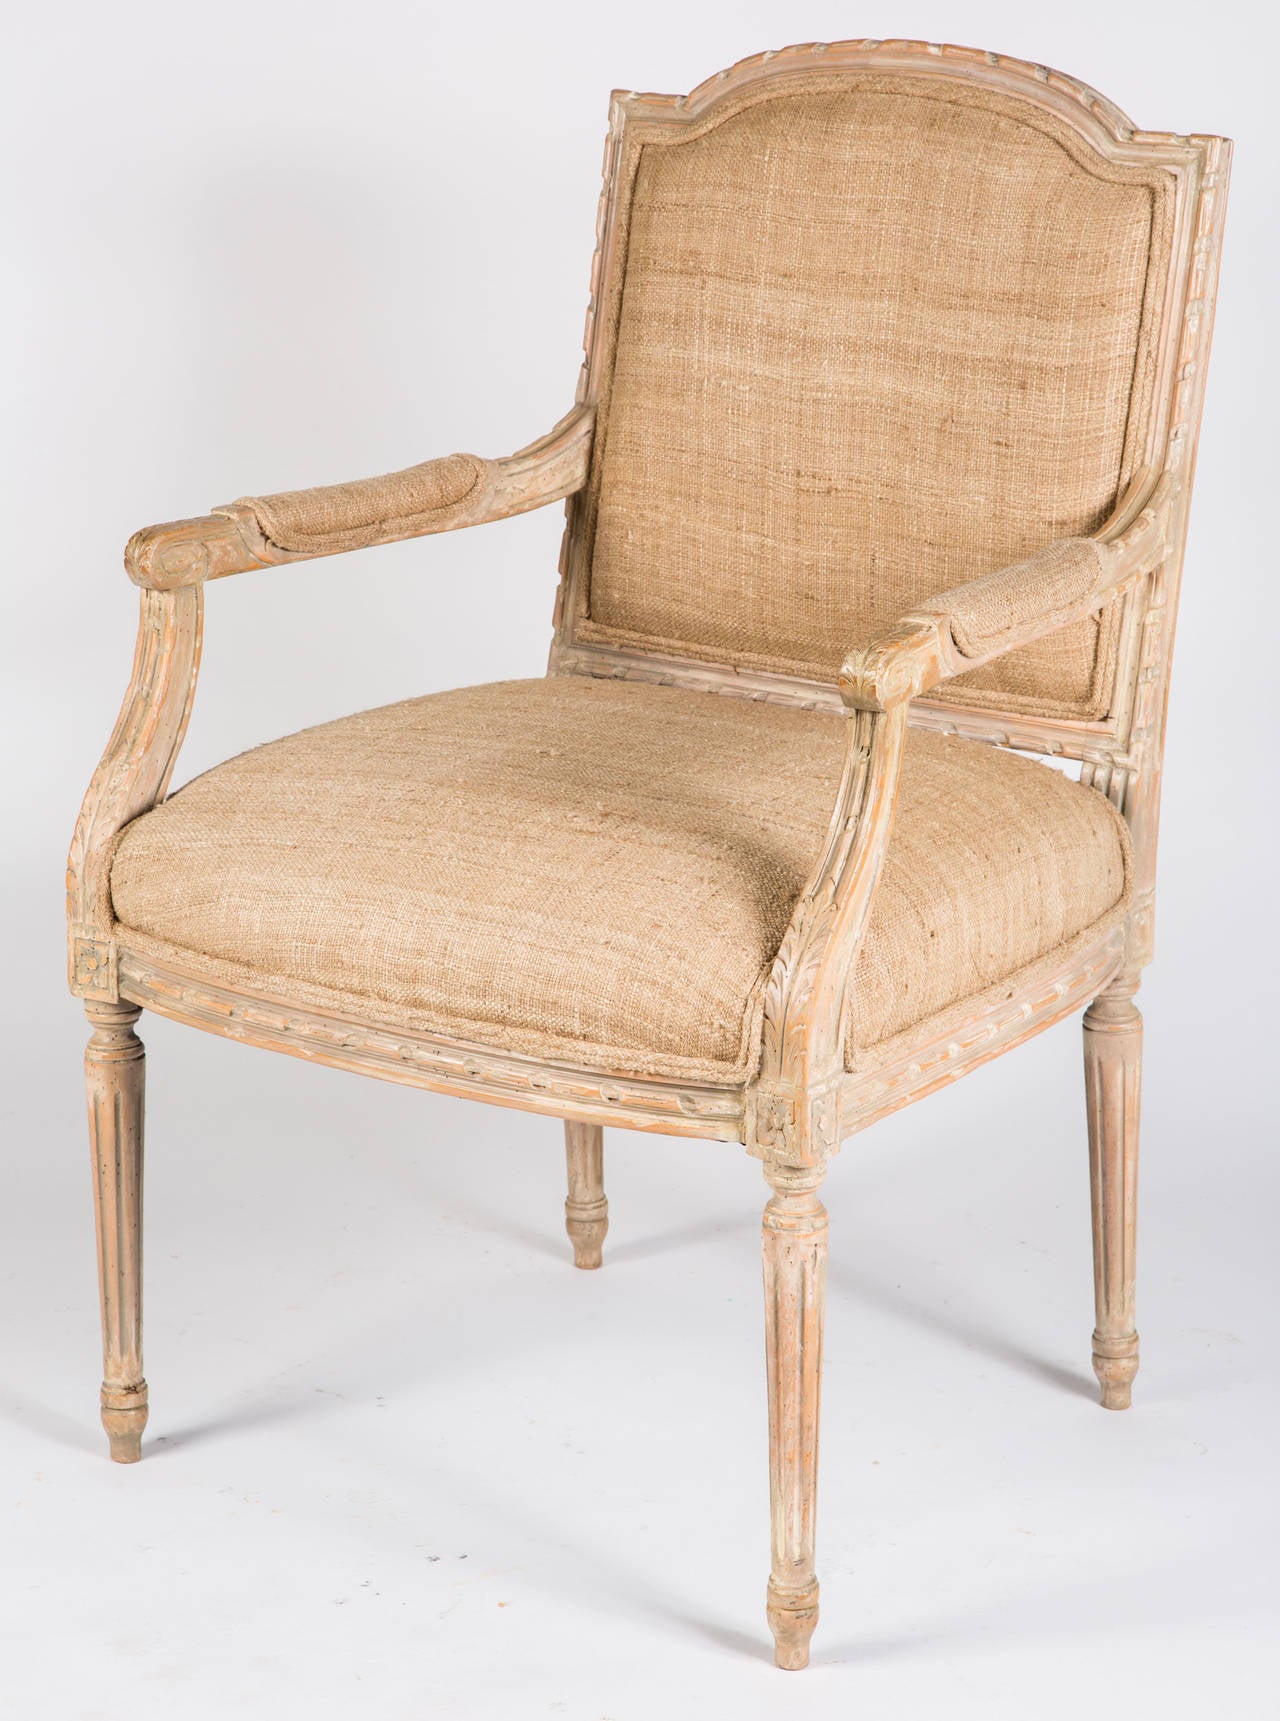 Four Armchairs Upholstered in Linen Silk In Excellent Condition For Sale In Summerland, CA